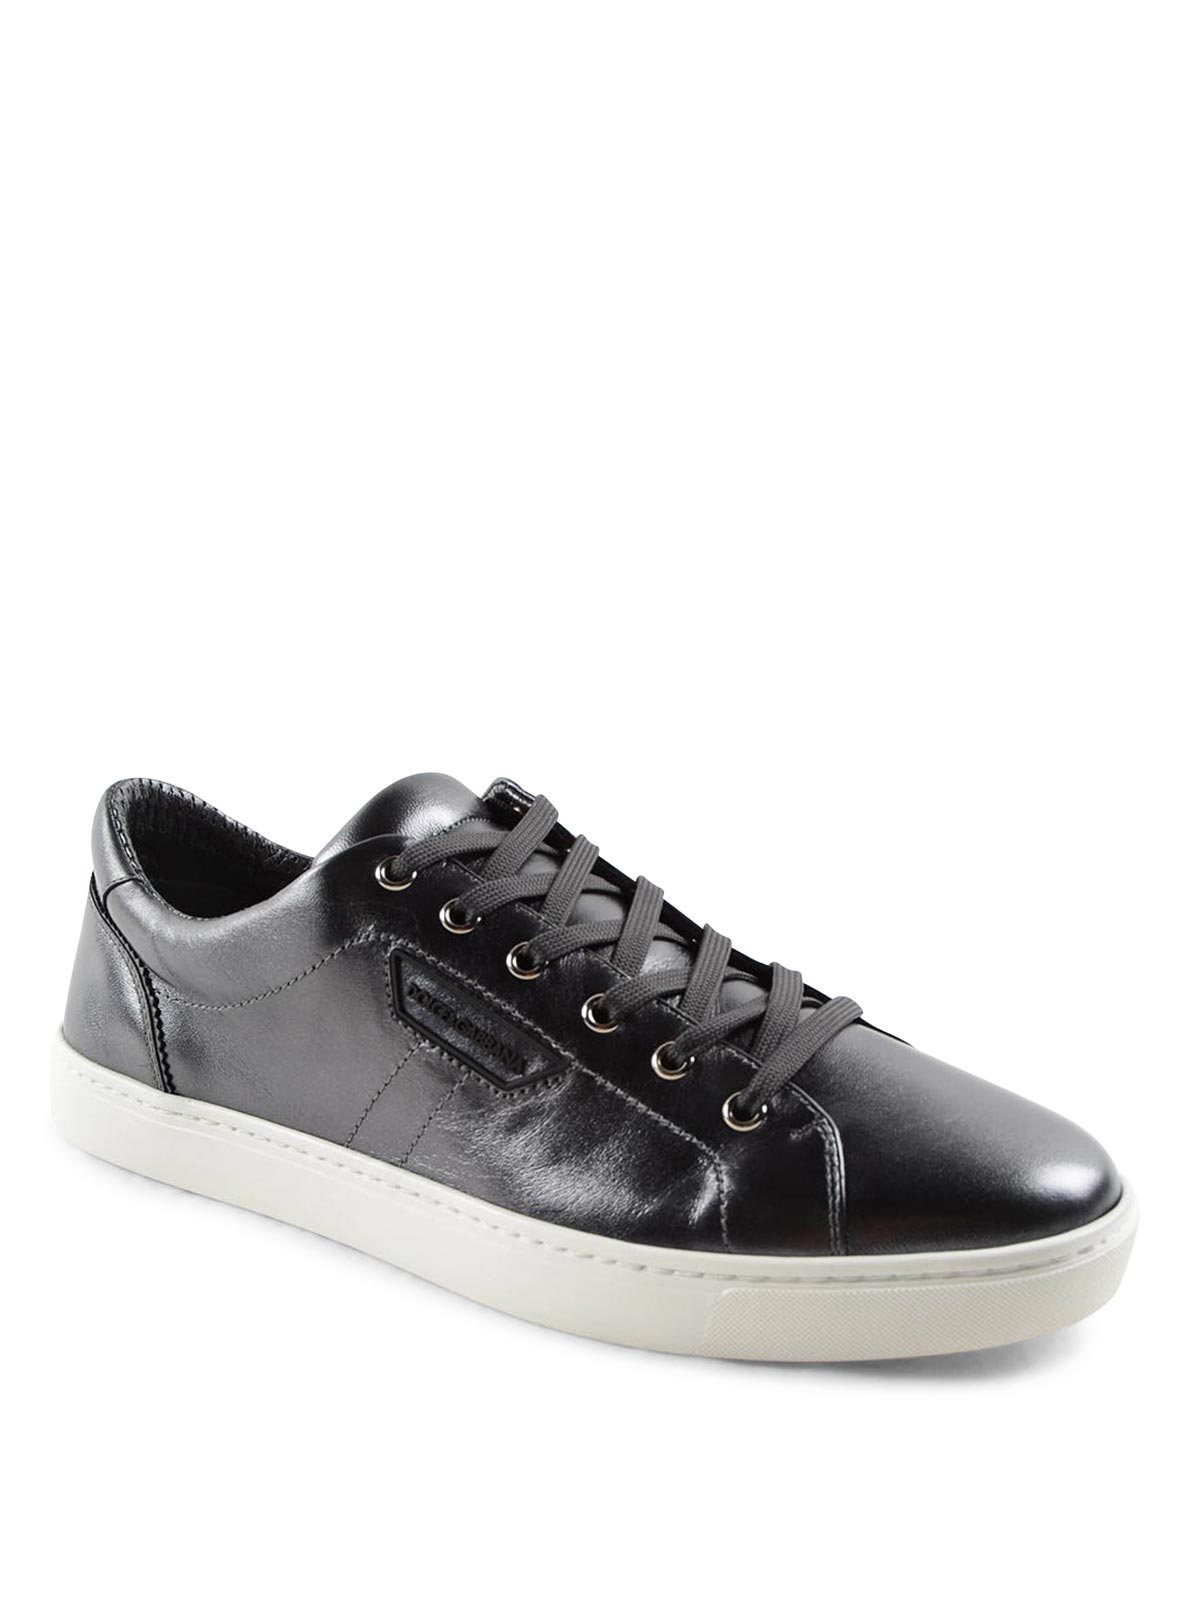 Trainers Dolce & Gabbana London nappa leather sneakers - CS1362AC95589859